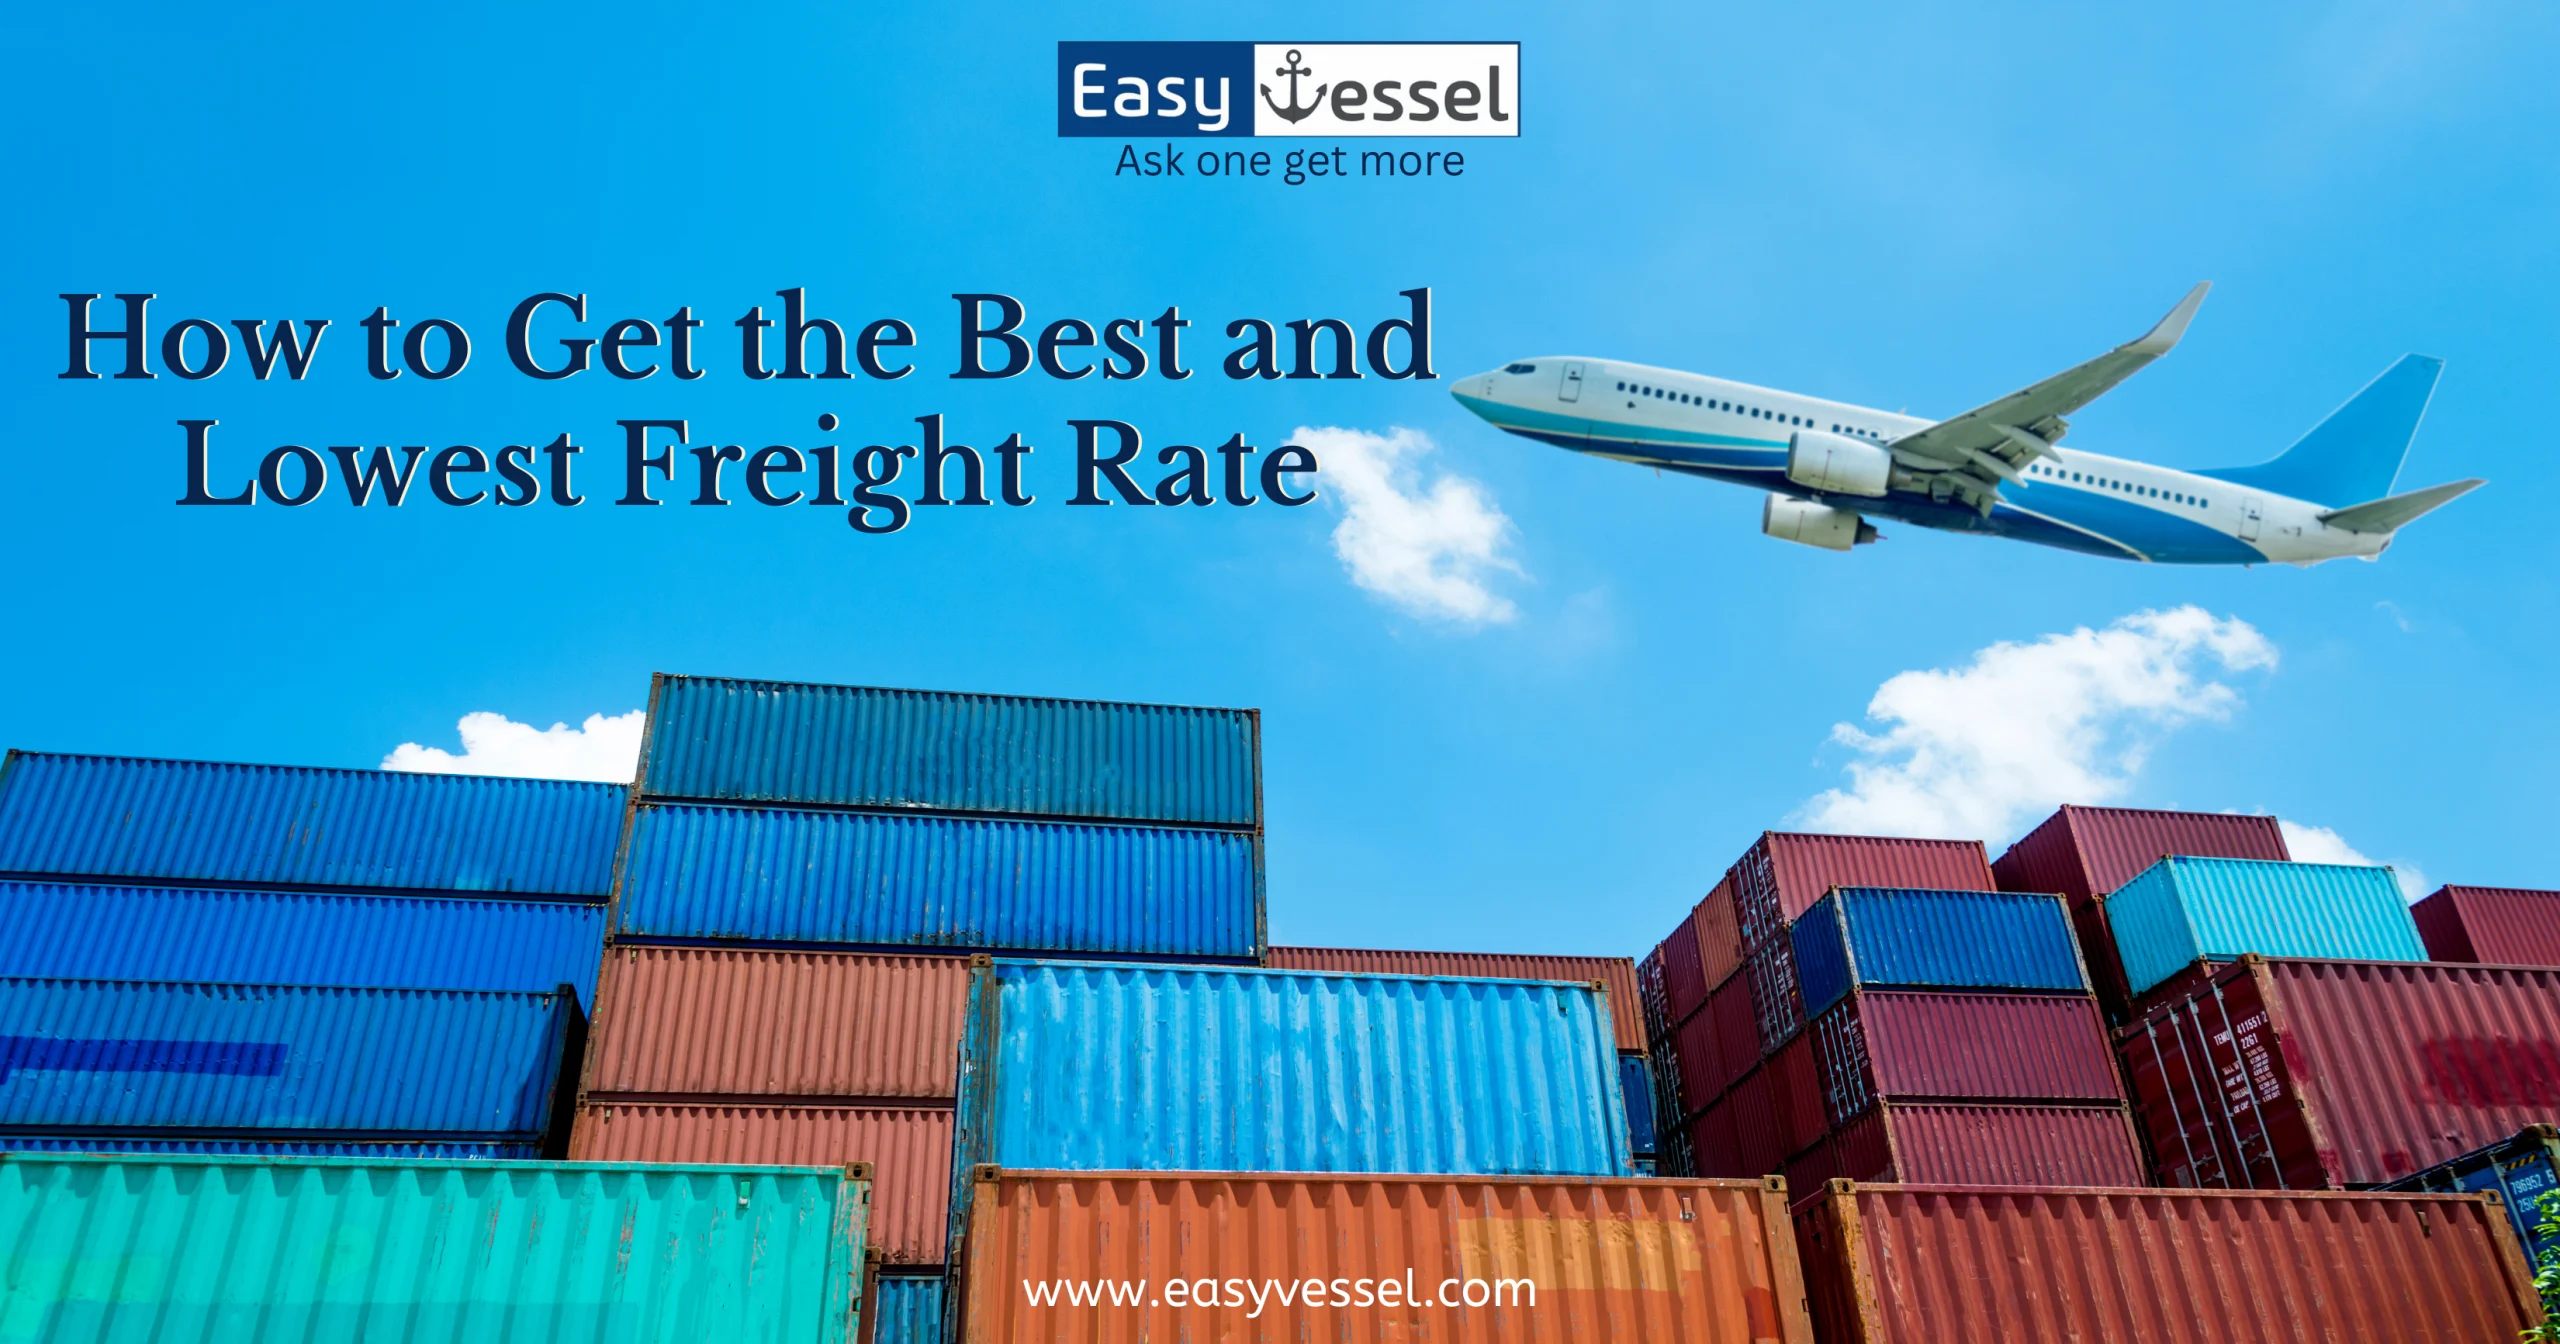 How to get freight rate